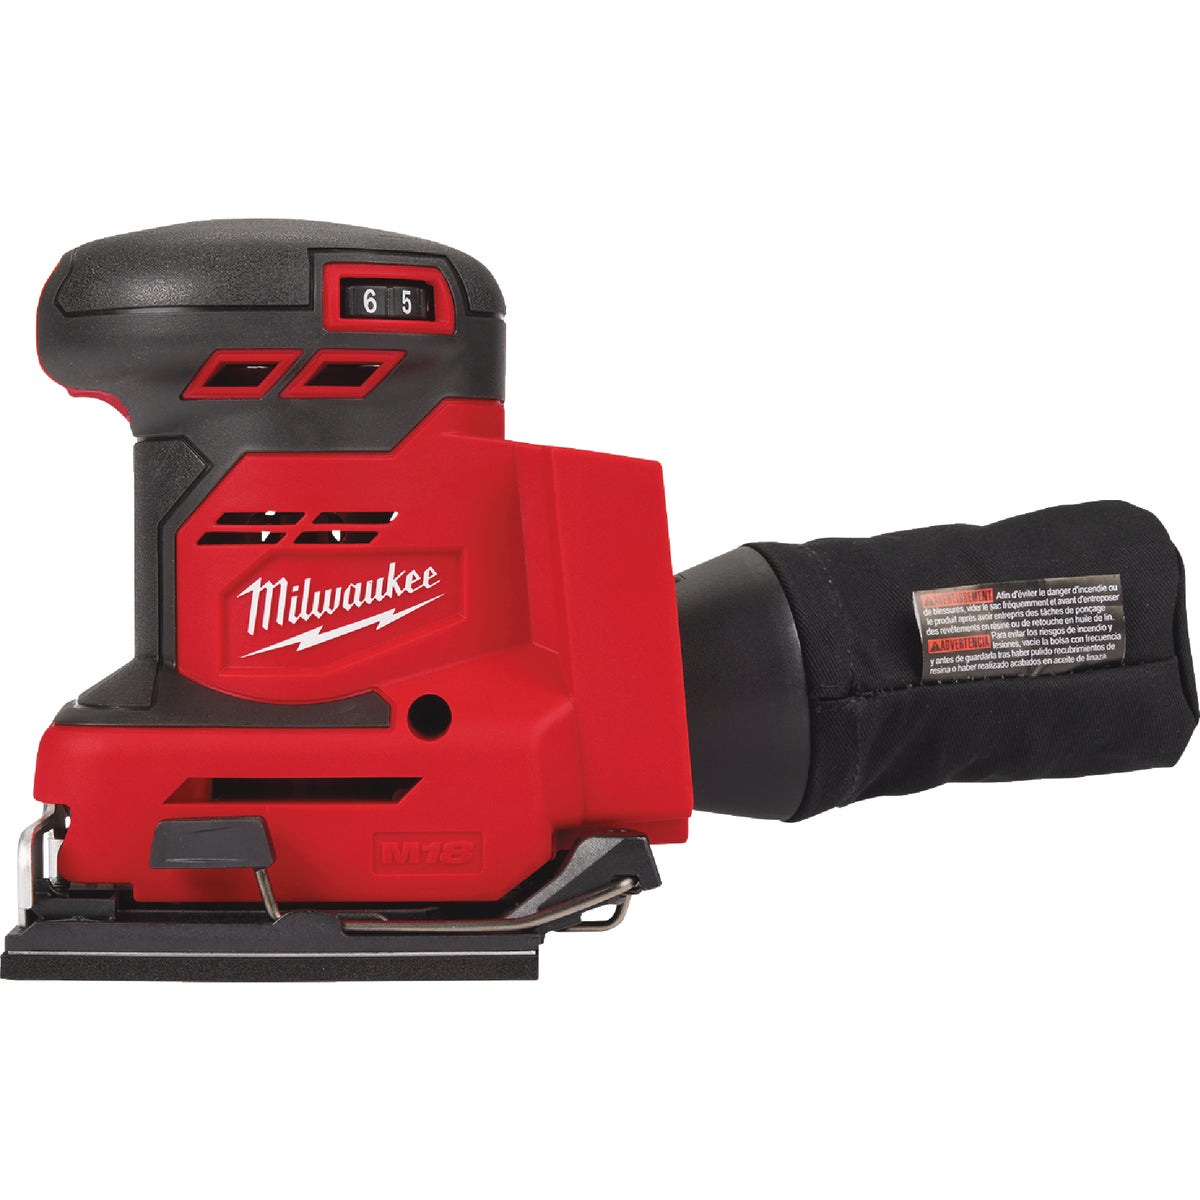 Milwaukee M18 18 Volt Lithium-Ion Variable Speed 1/4 Sheet Cordless Finish Sander (Tool Only)